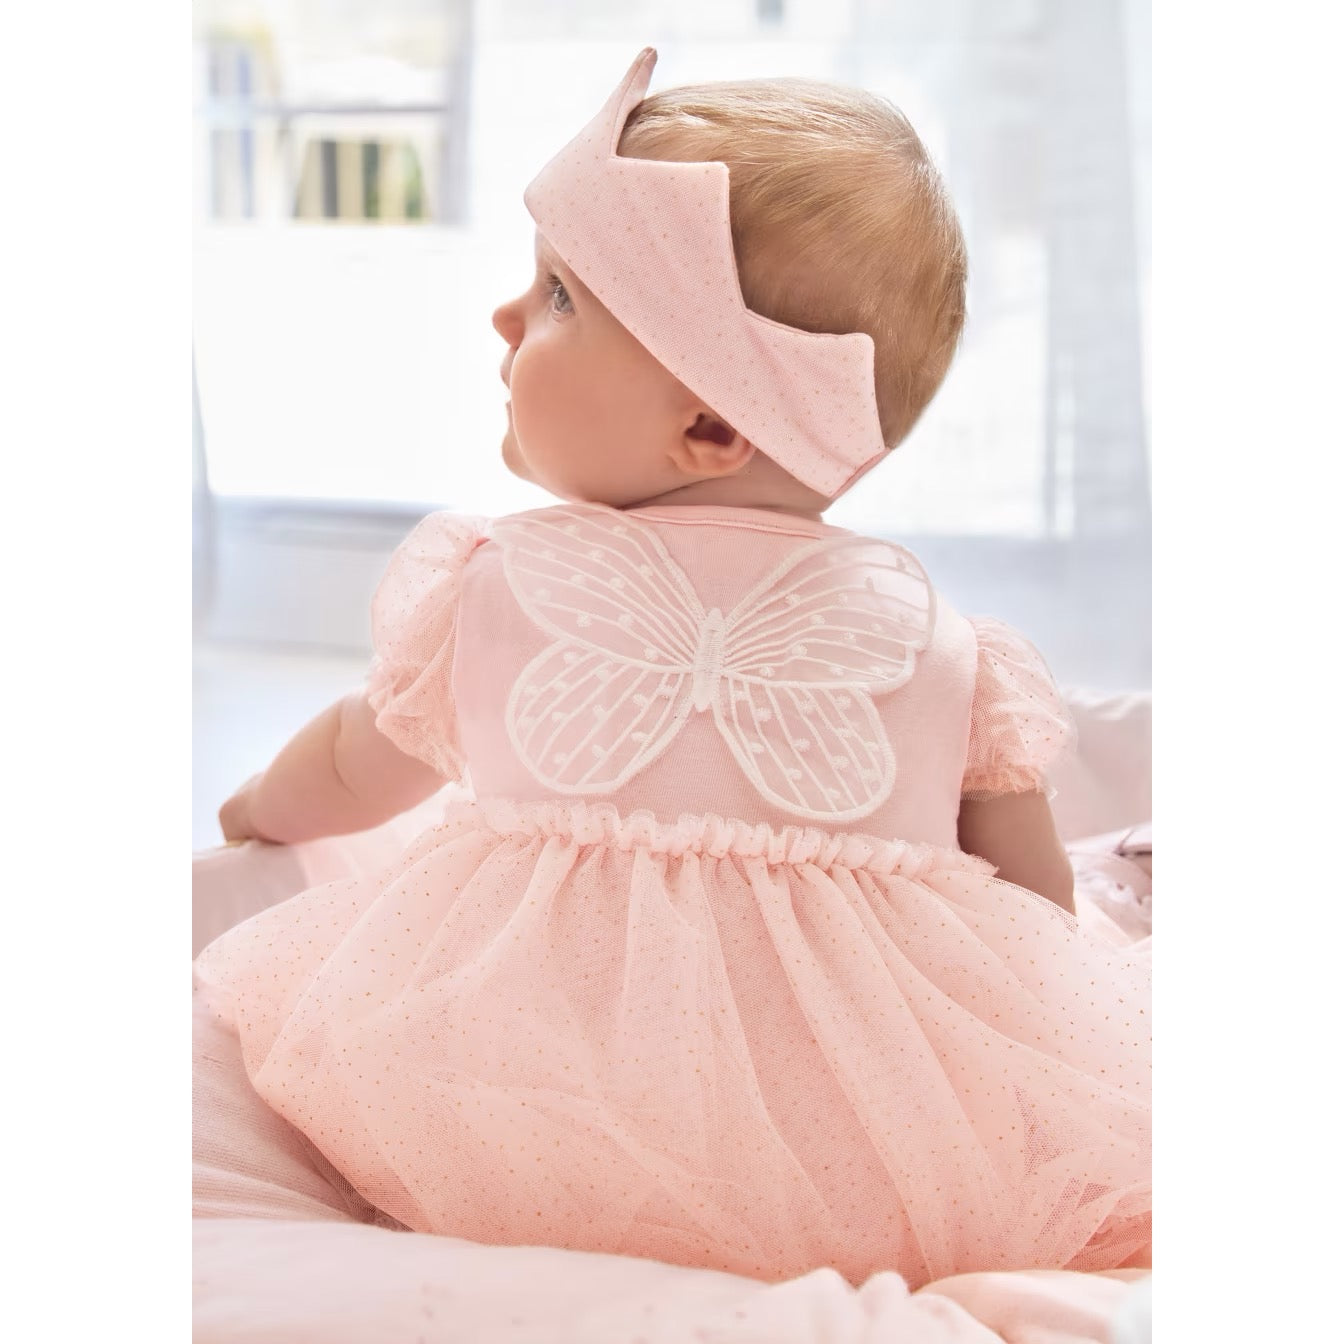 Mayoral Baby Girls Romper Dress And Headband Set 1629 Antique Pink Clothing 4-6M / Antique Pink,6-9M / Antique Pink,12M / Antique Pink,18M / Antique Pink